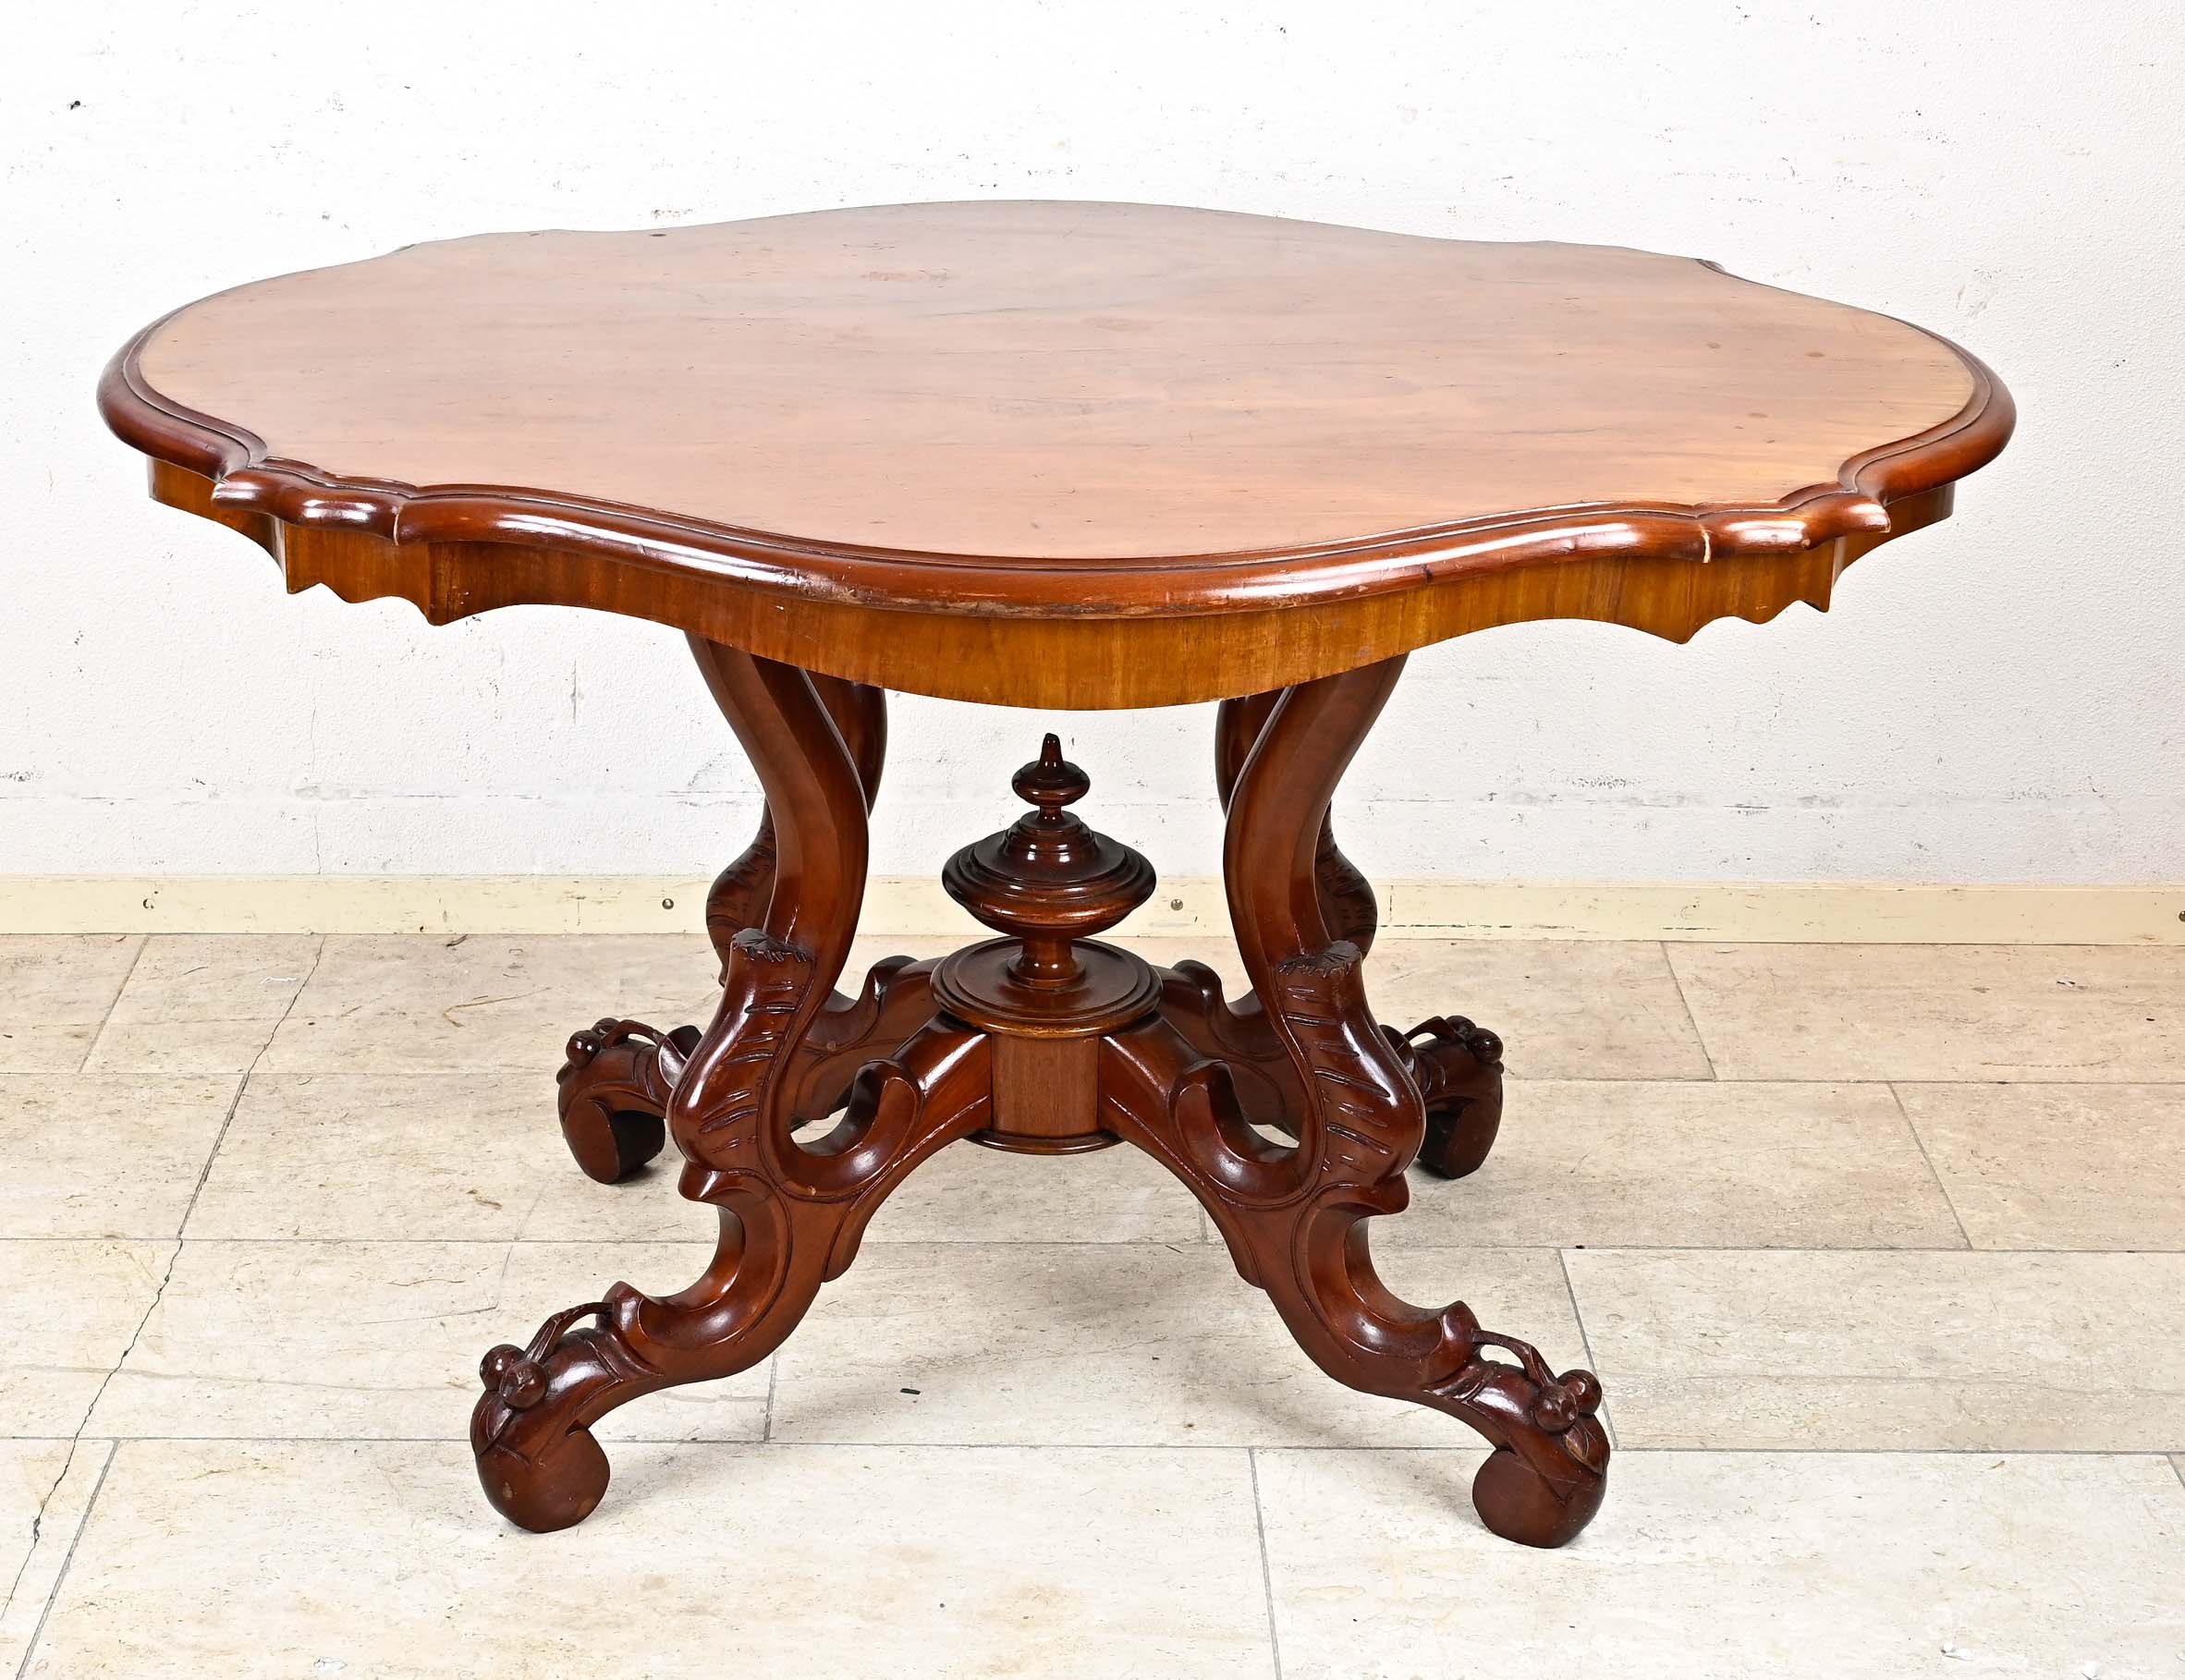 Louis-Philippe salon table around 1870, mahogany, curved top with corresponding frame on curved